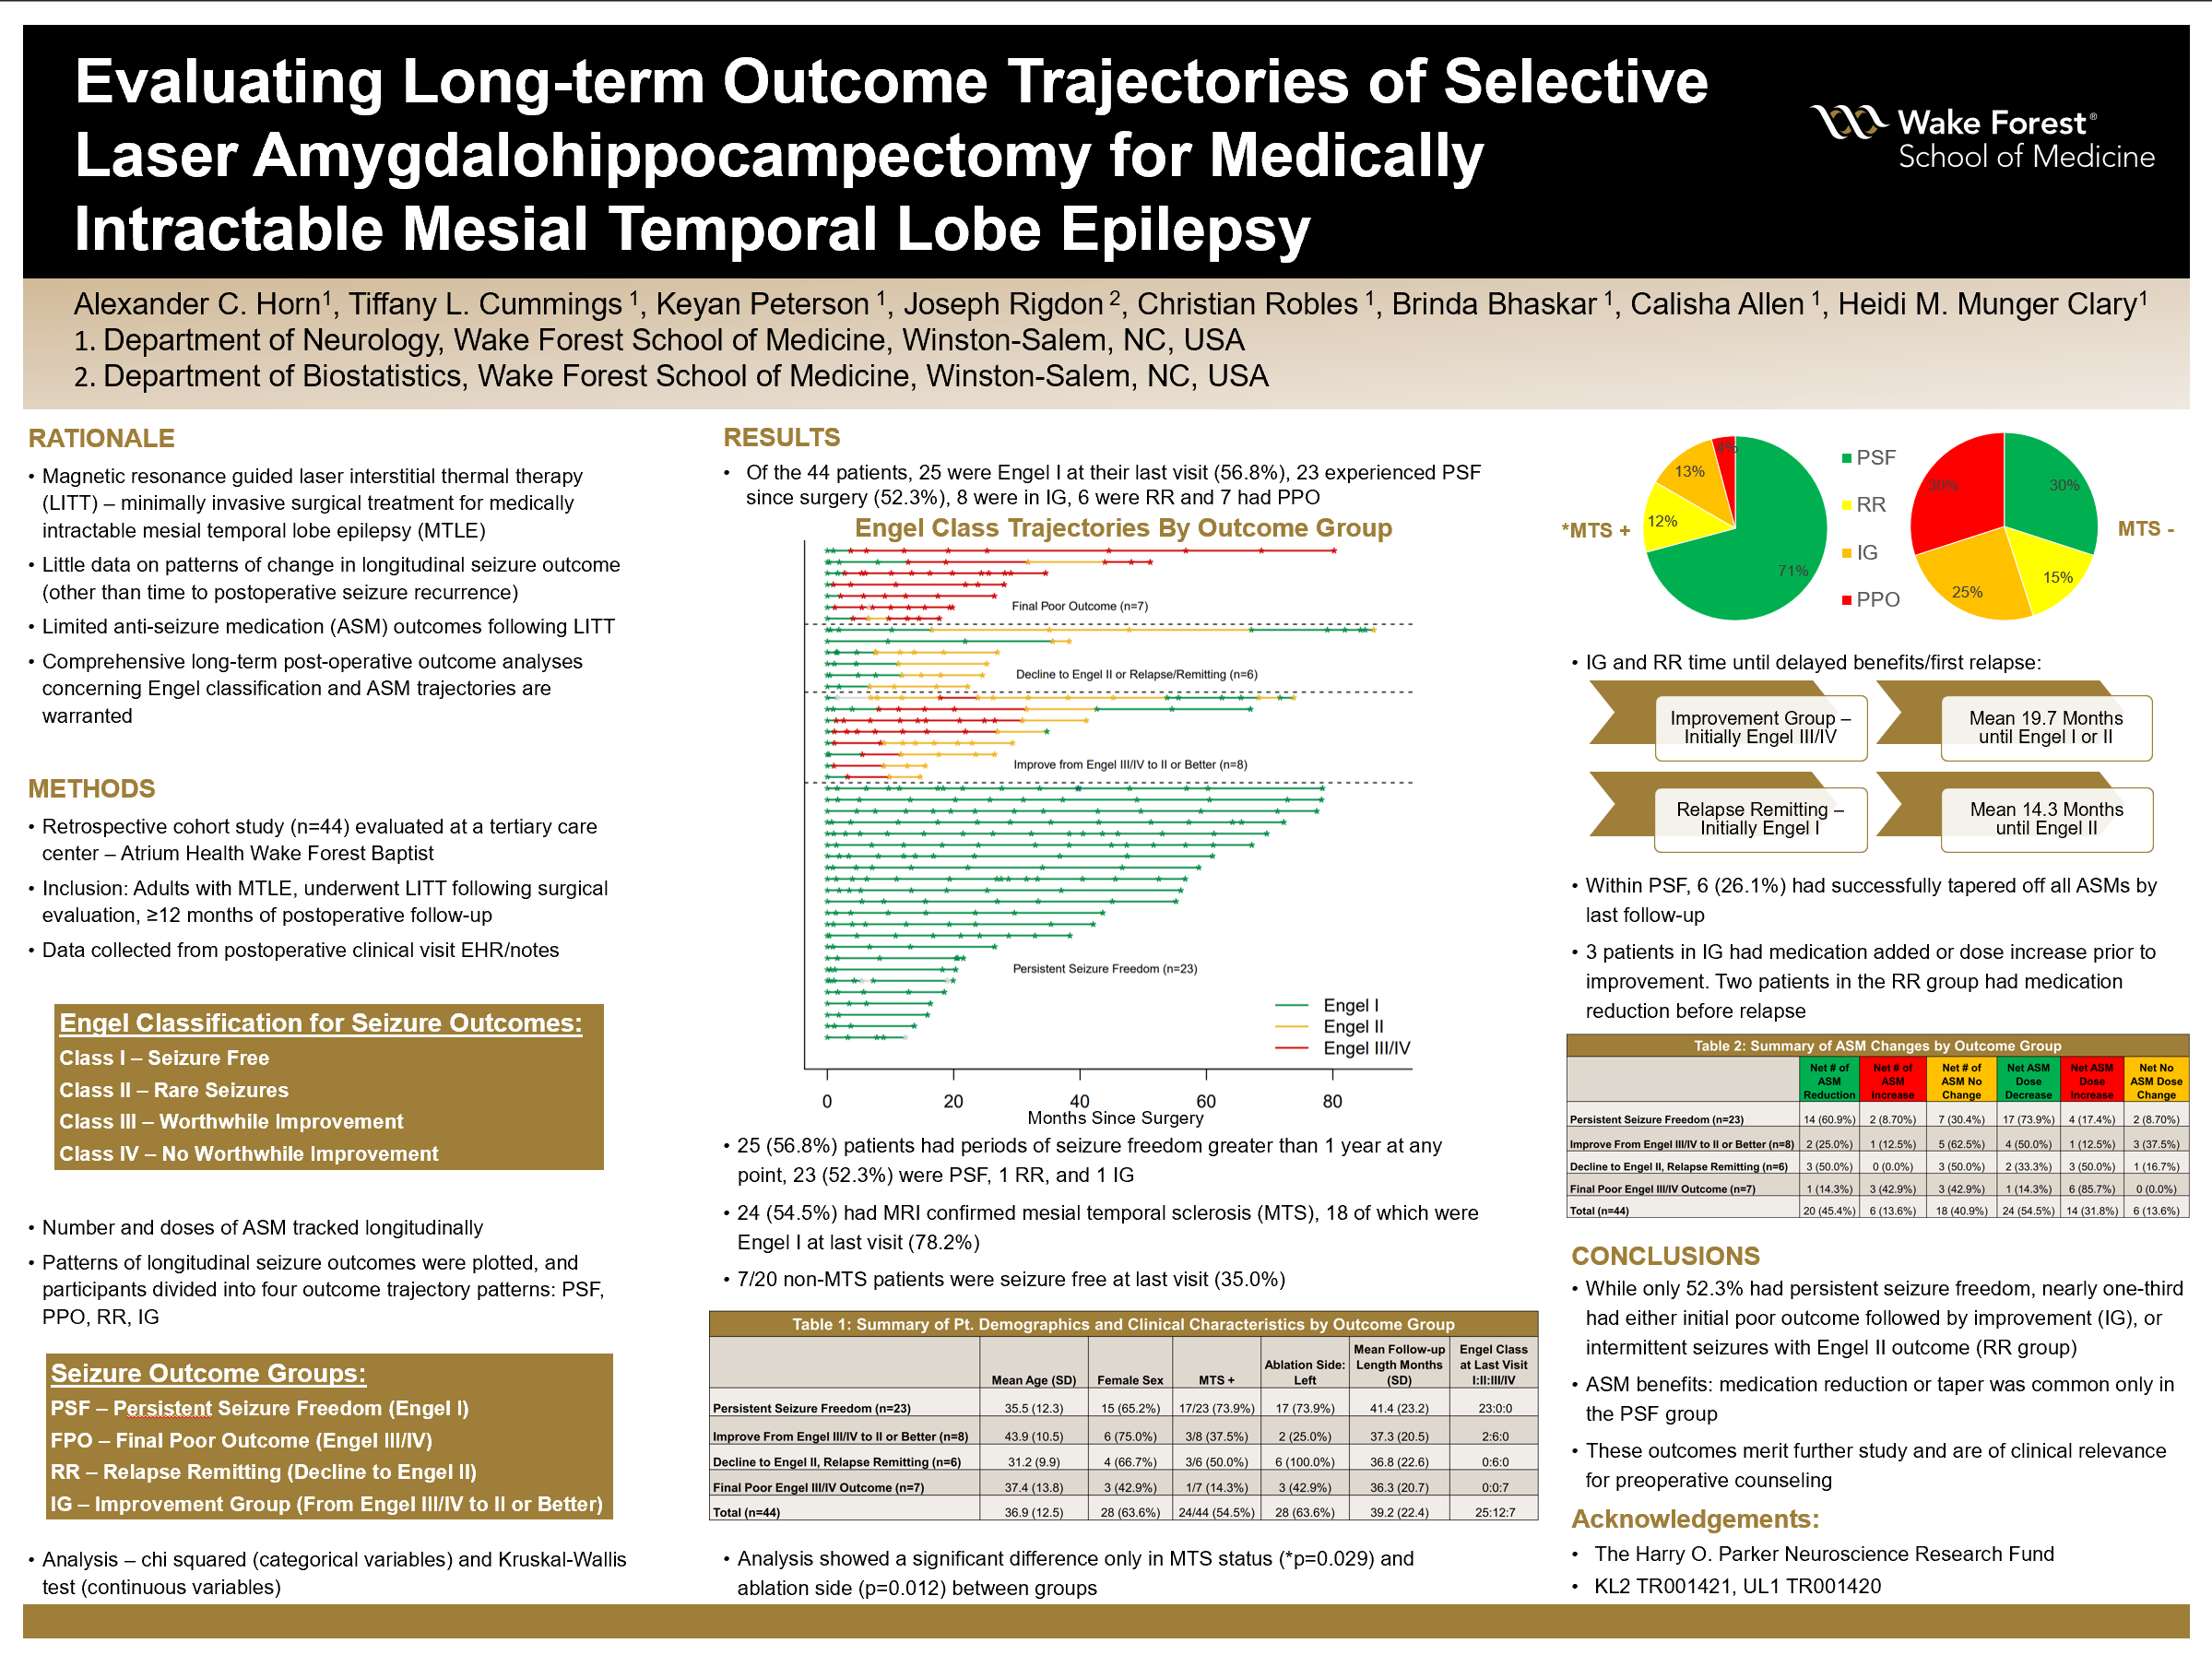 Showcase Image for Evaluating Long-term Outcome Trajectories of Selective Laser Amygdalohippocampectomy for Medically Intractable Mesial Temporal Lobe Epilepsy 